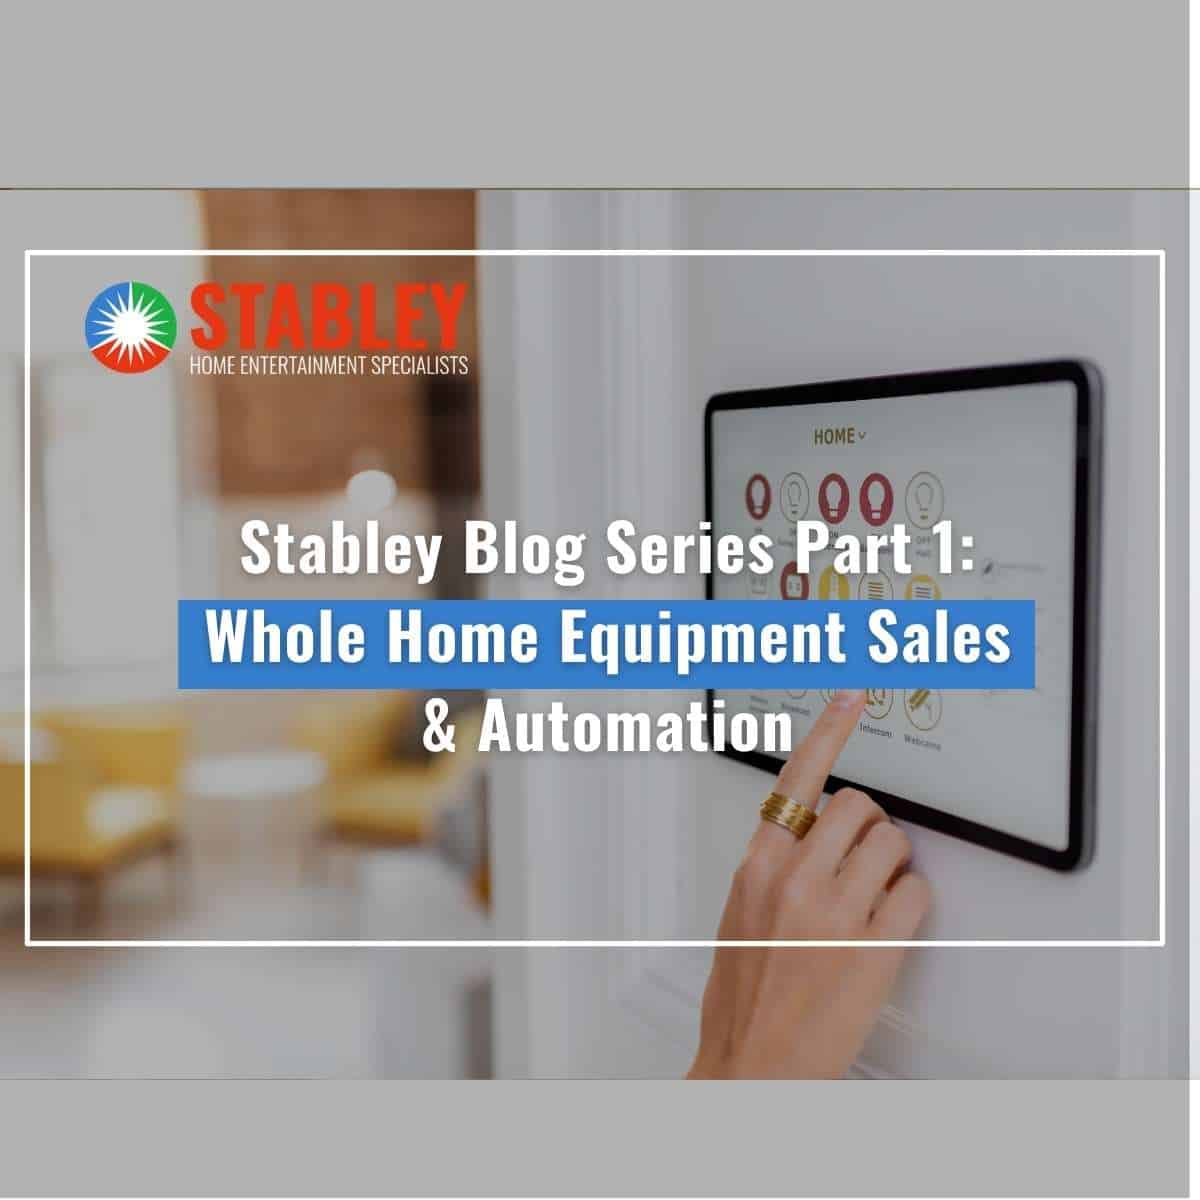 Stabley Blog Series Part 1 Whole Home Equipment Sales & Automation